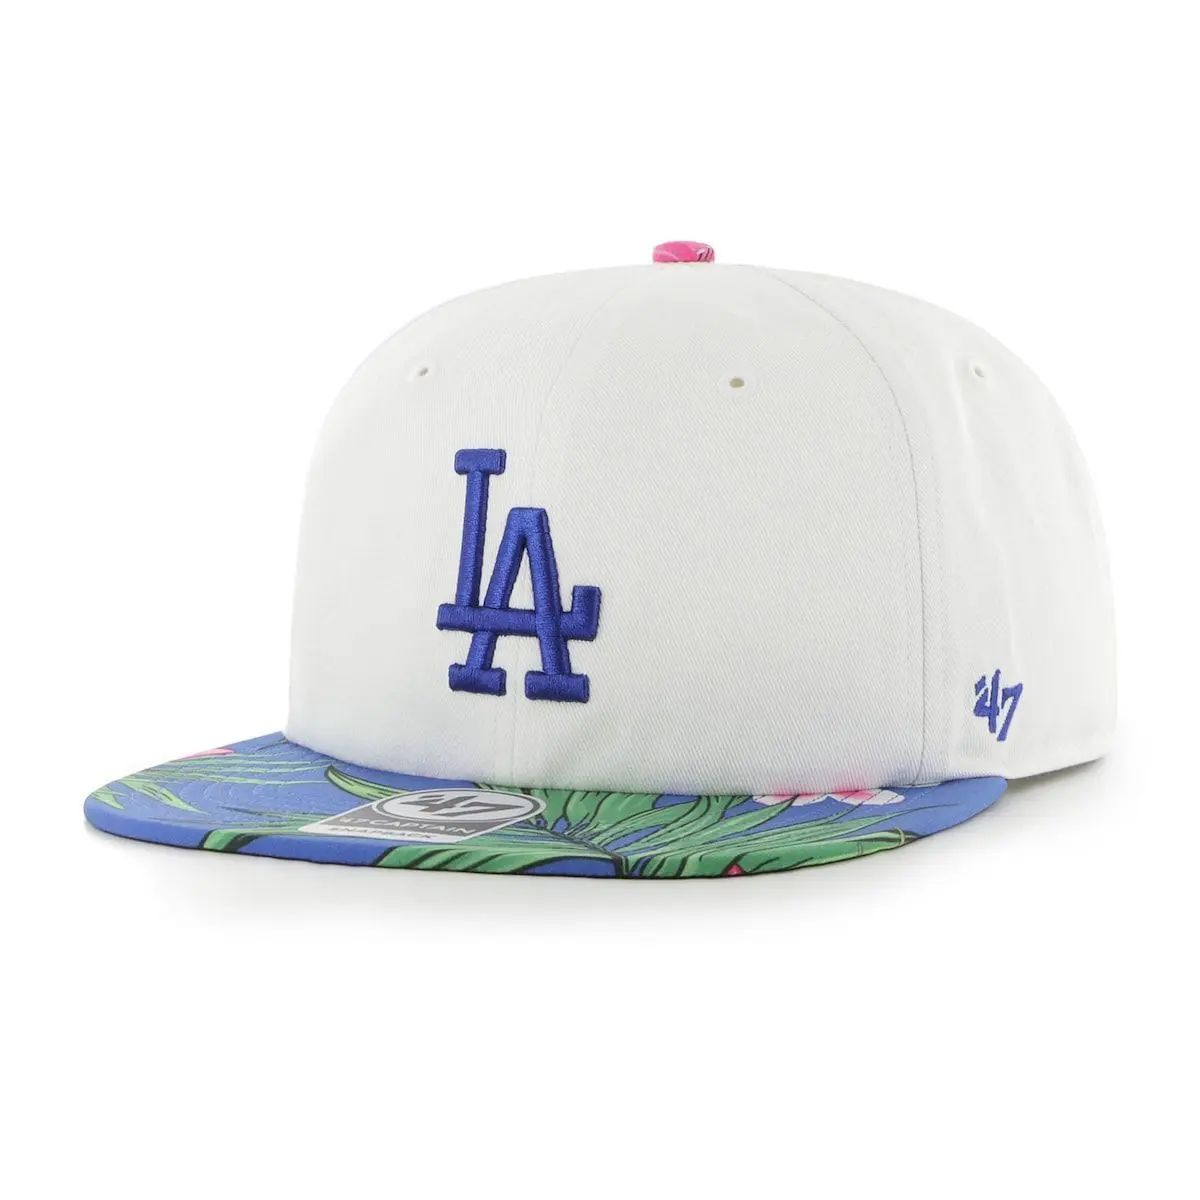 Men's Hurley x '47 White Los Angeles Dodgers Paradise Captain Snapback Hat at Nordstrom, Size One Si | Nordstrom